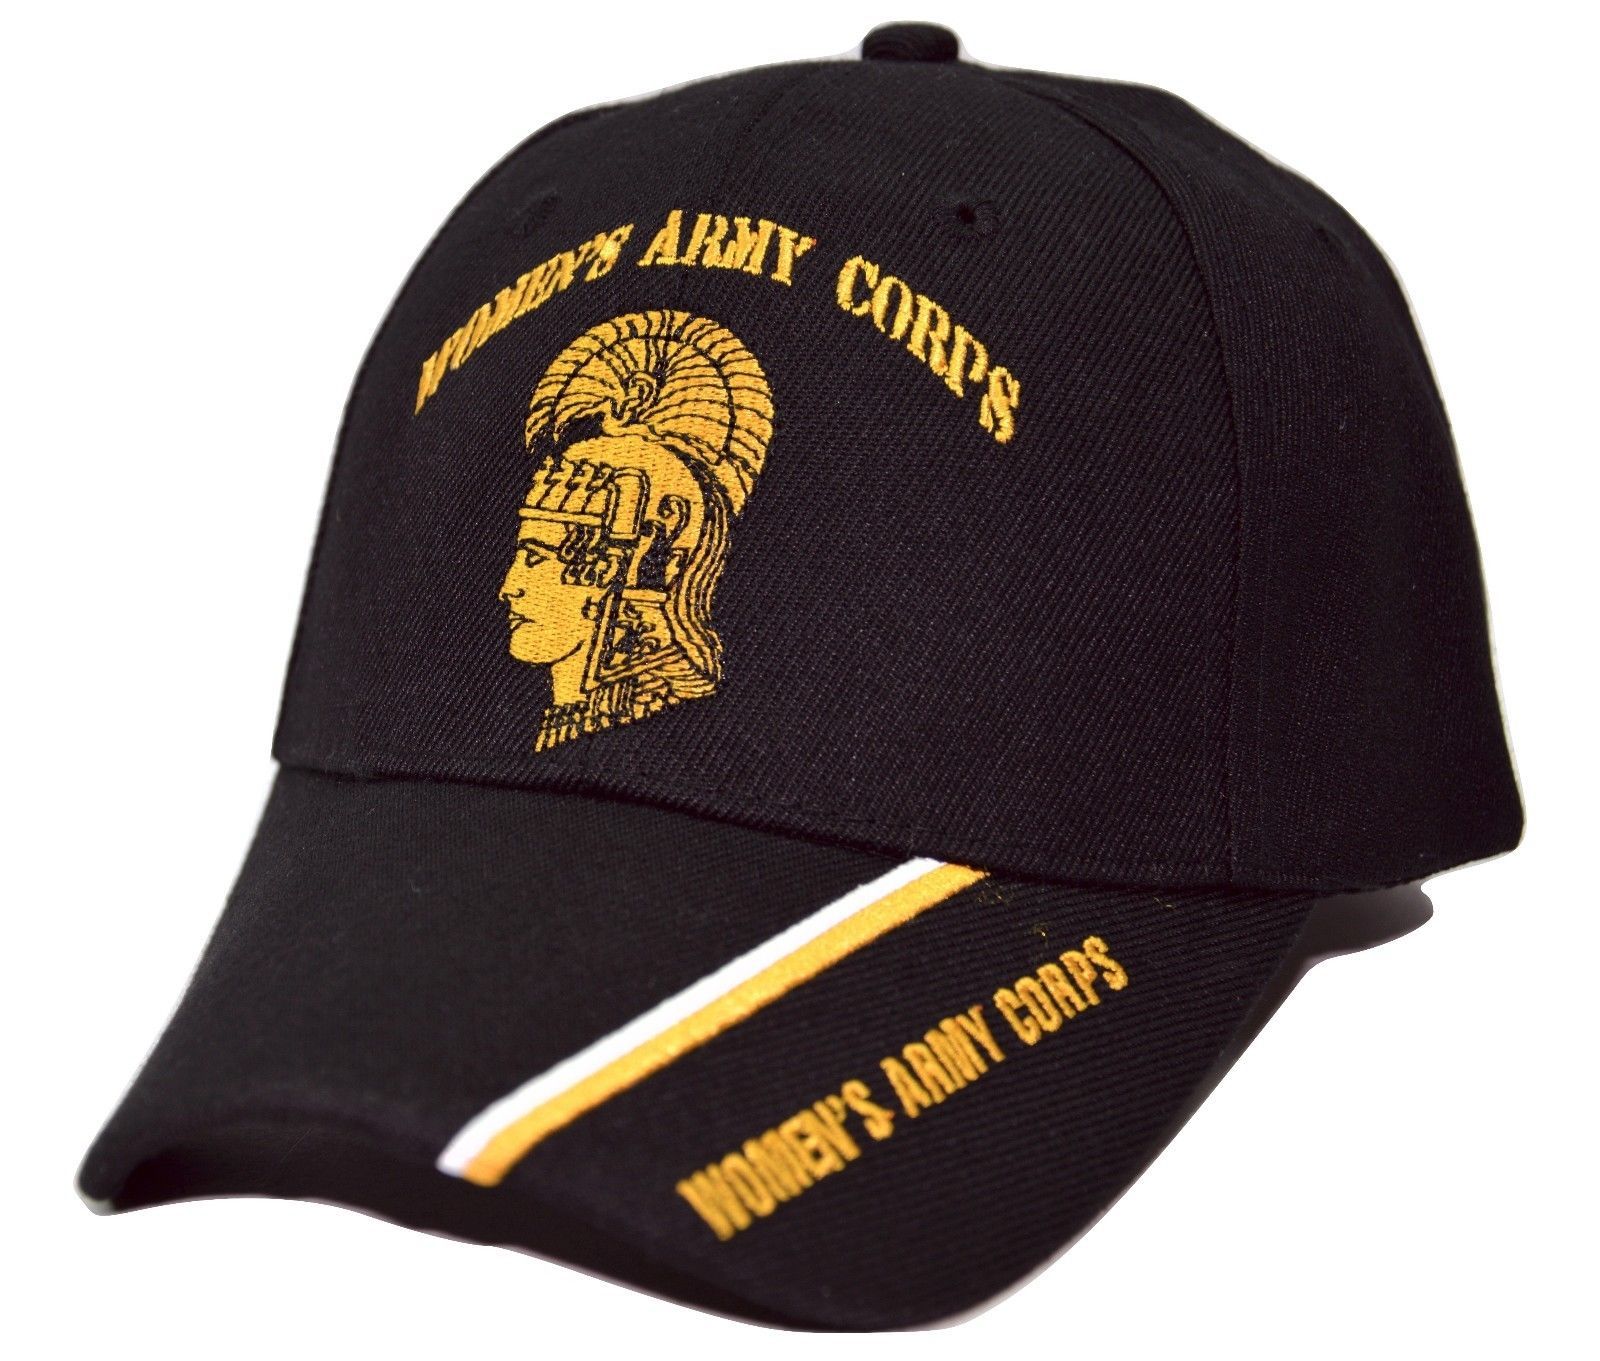 United States Army Women's Army Corps  Adjustable Military Cap Hat